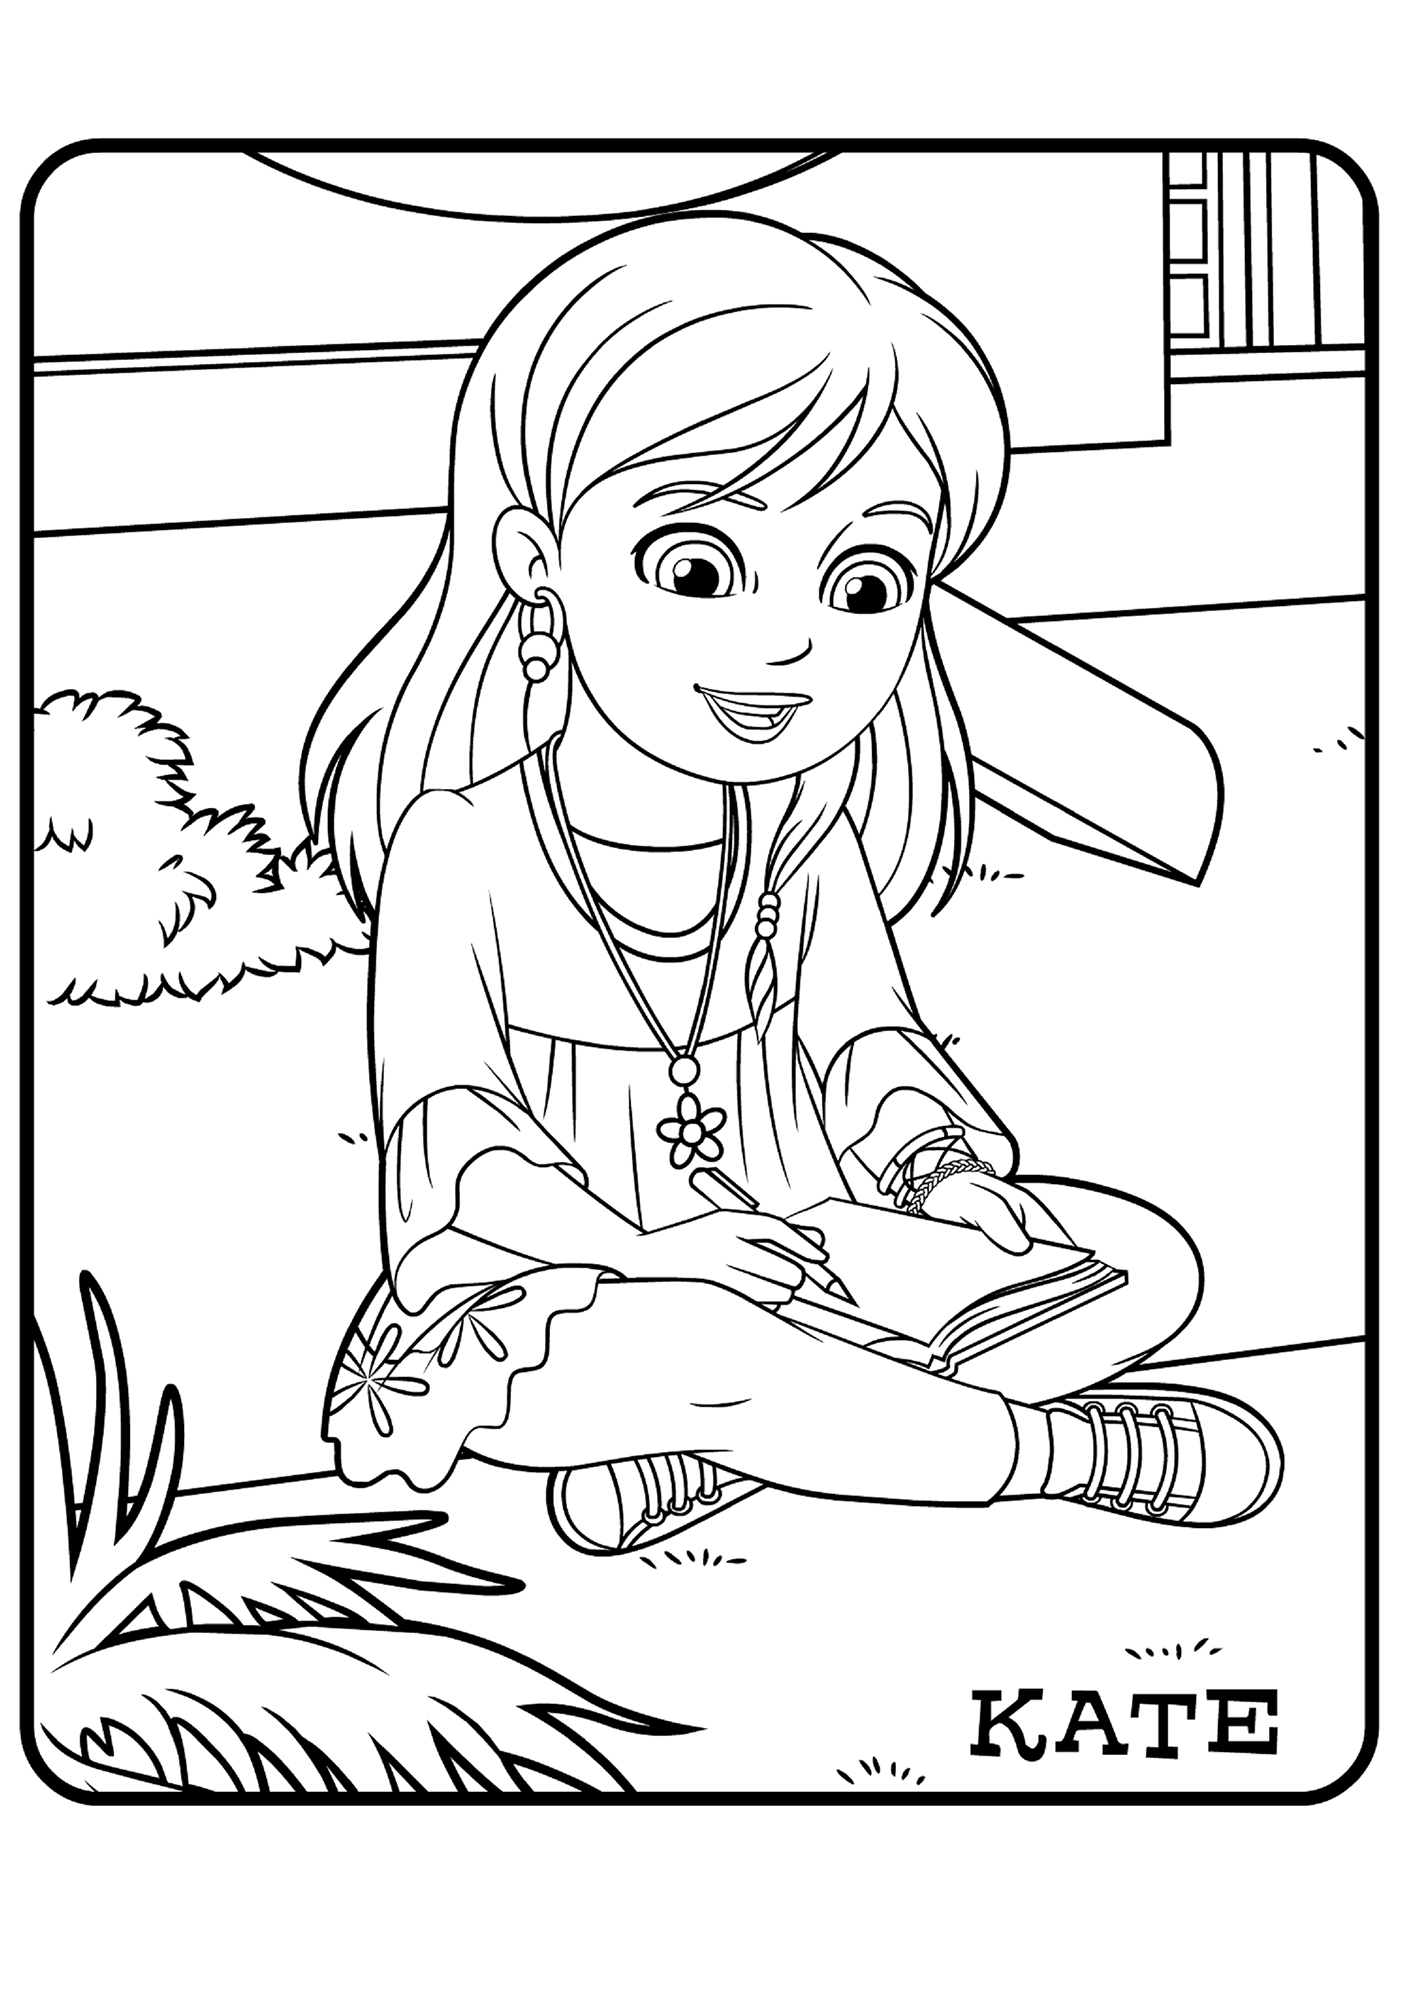 Dora and friends coloring pages to download and print for free